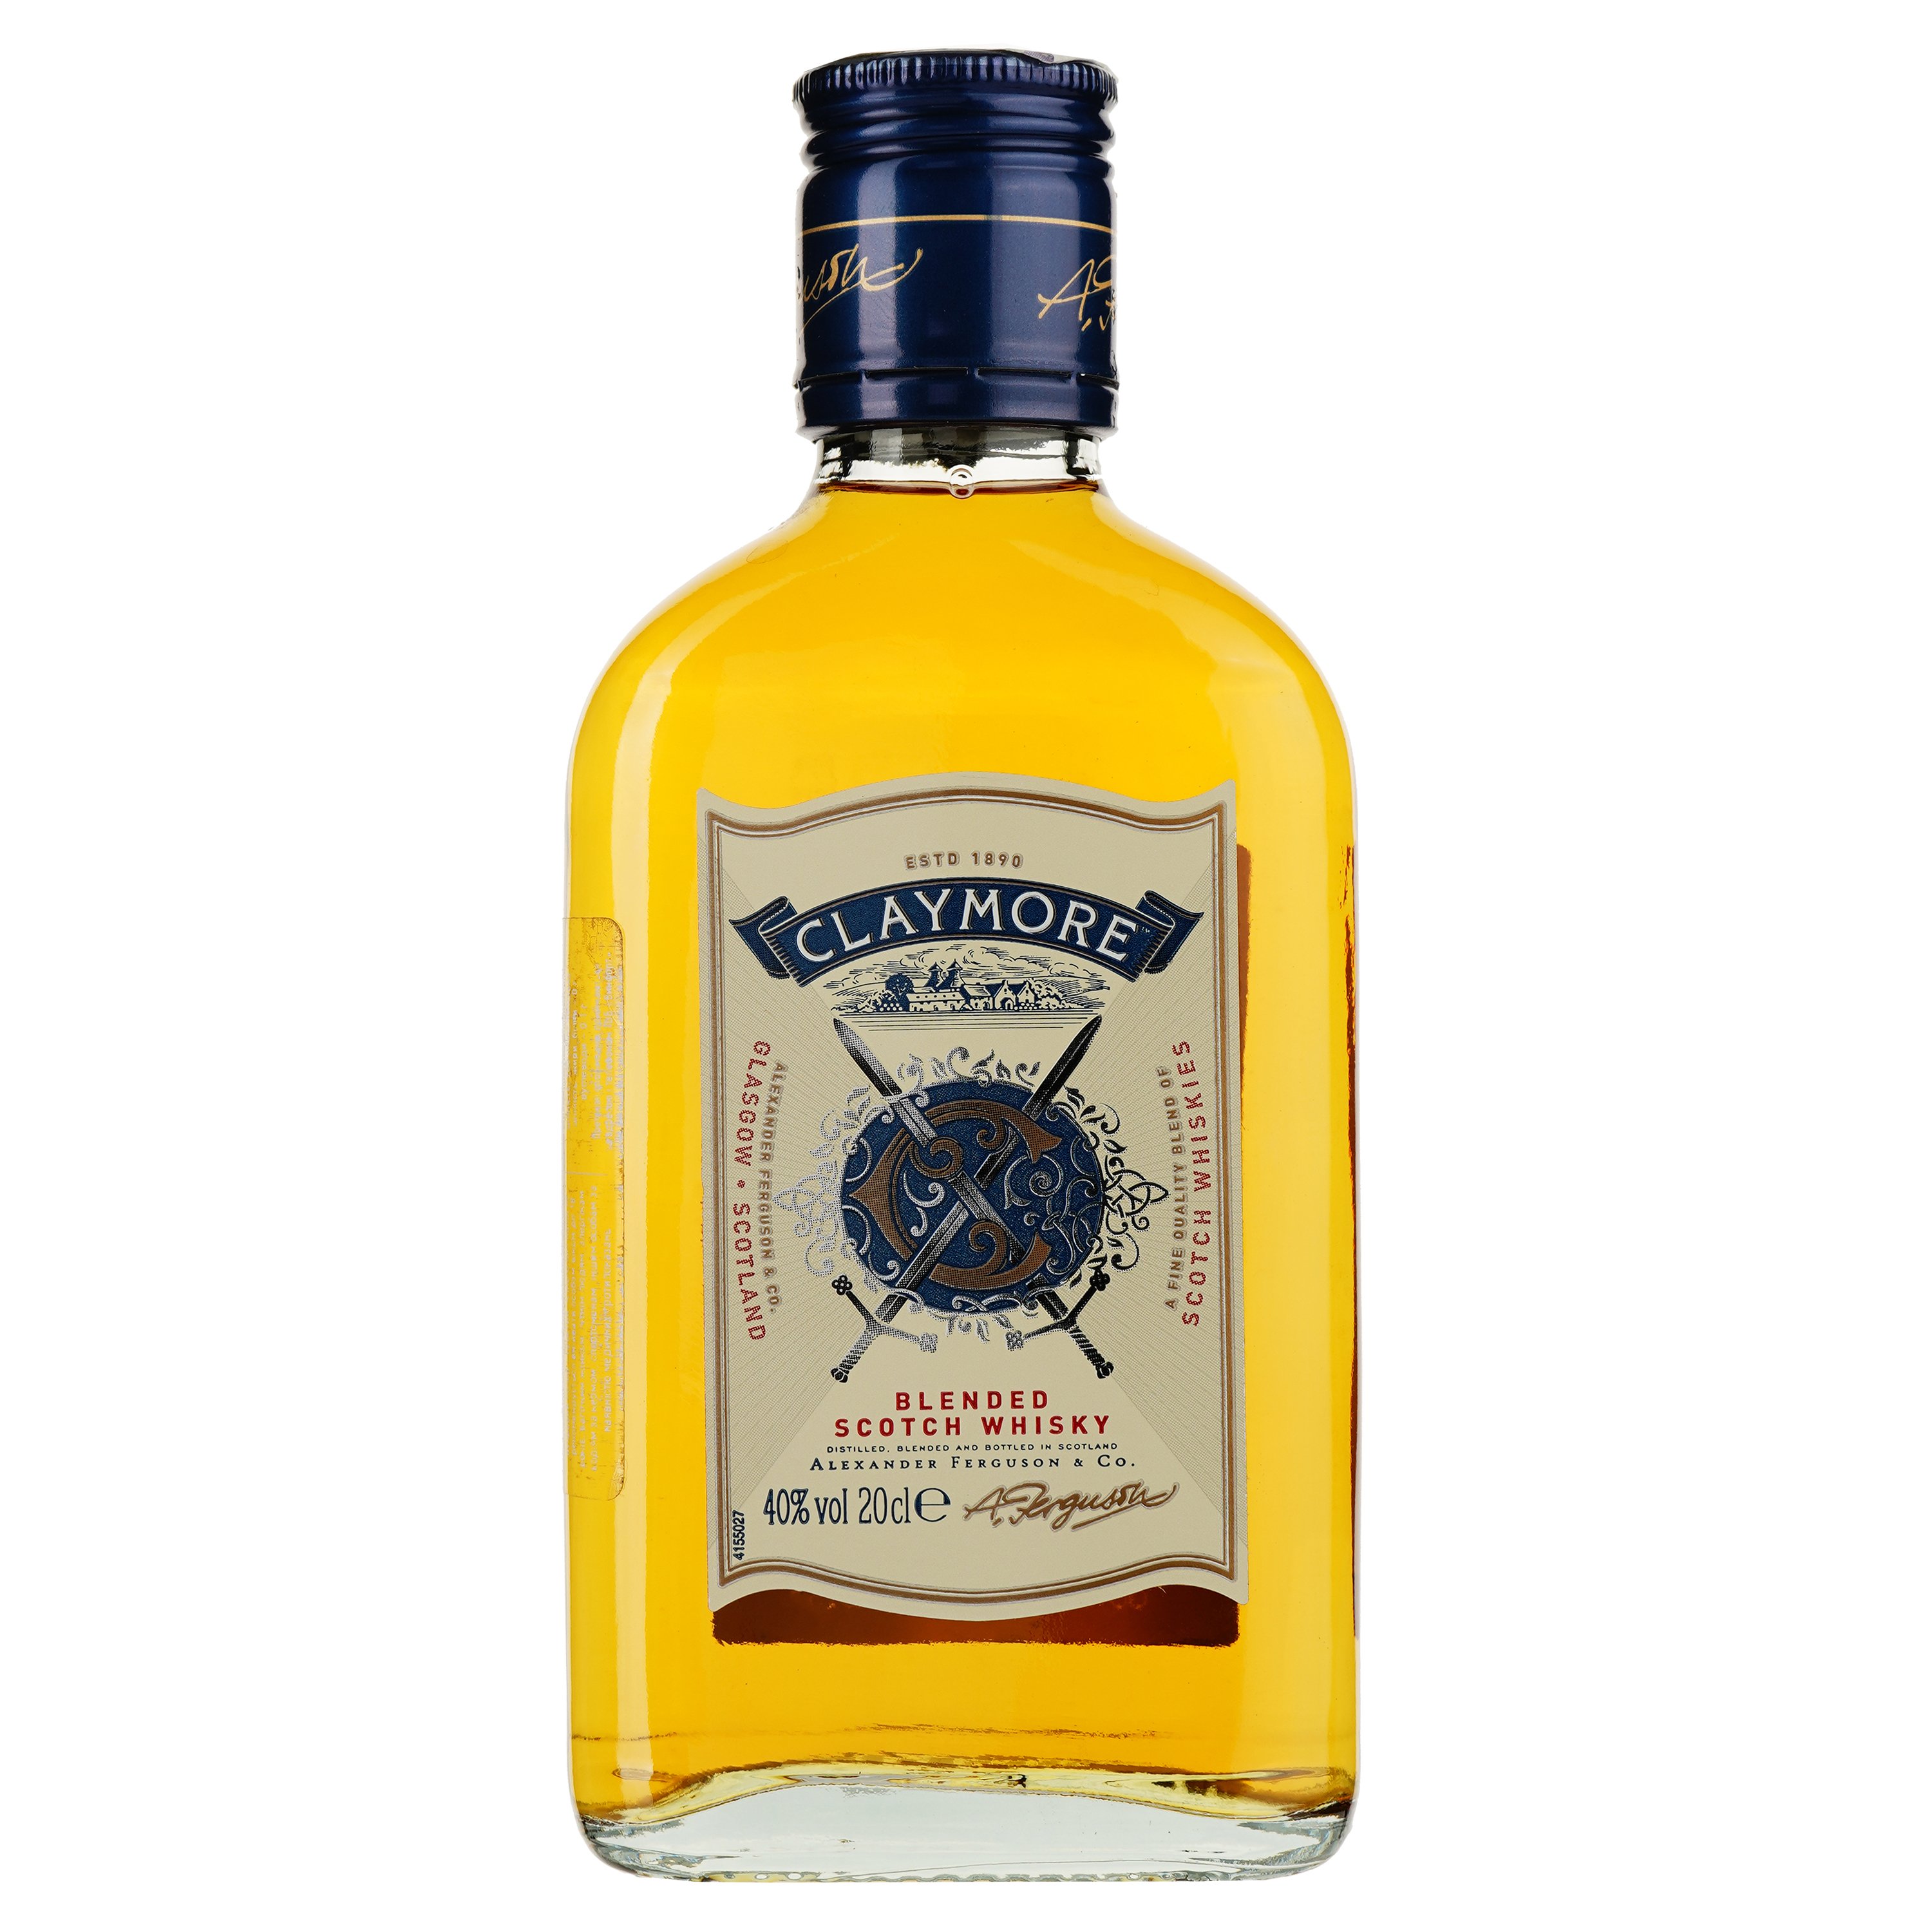 Виски Claymore Blended Scotch Whisky, 40%, 0,2 л - фото 1